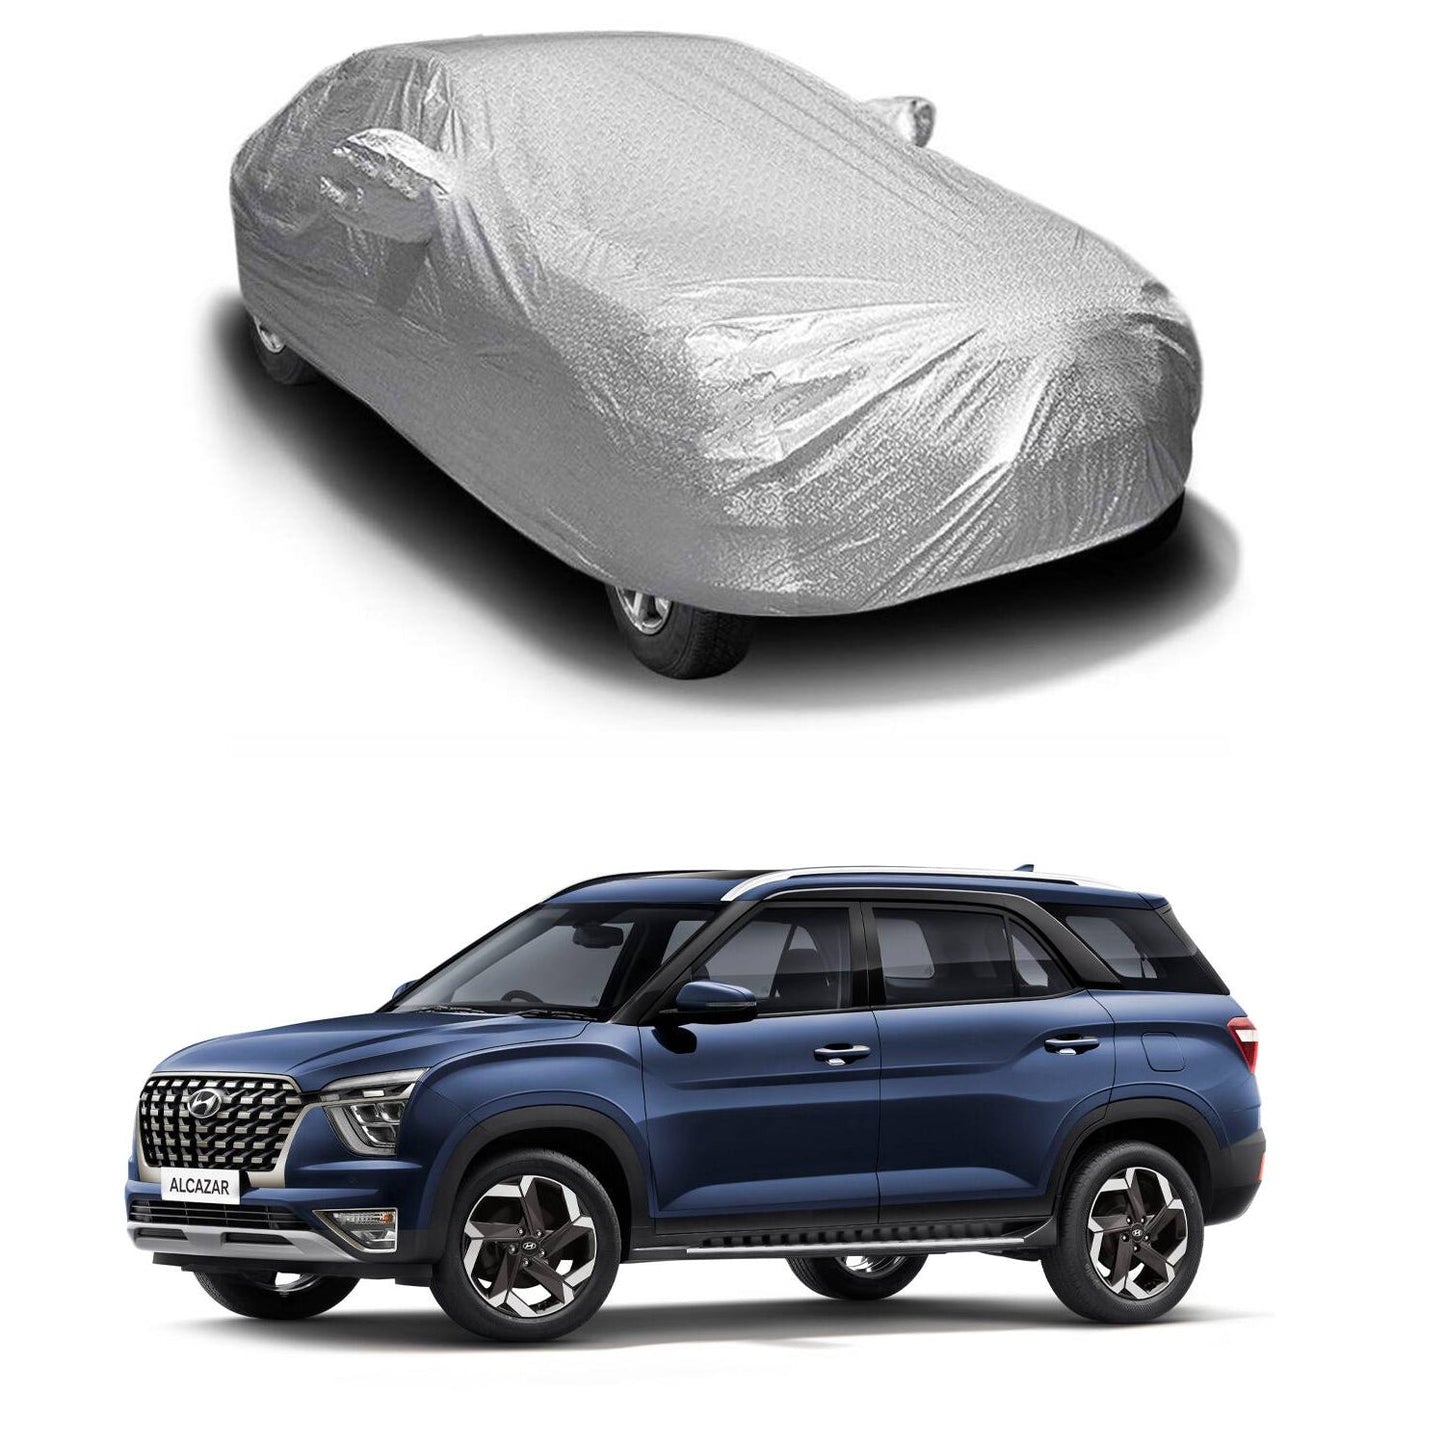 Oshotto Spyro Silver Anti Reflective, dustproof and Water Proof Car Body Cover with Mirror Pockets For Hyundai Alcazar